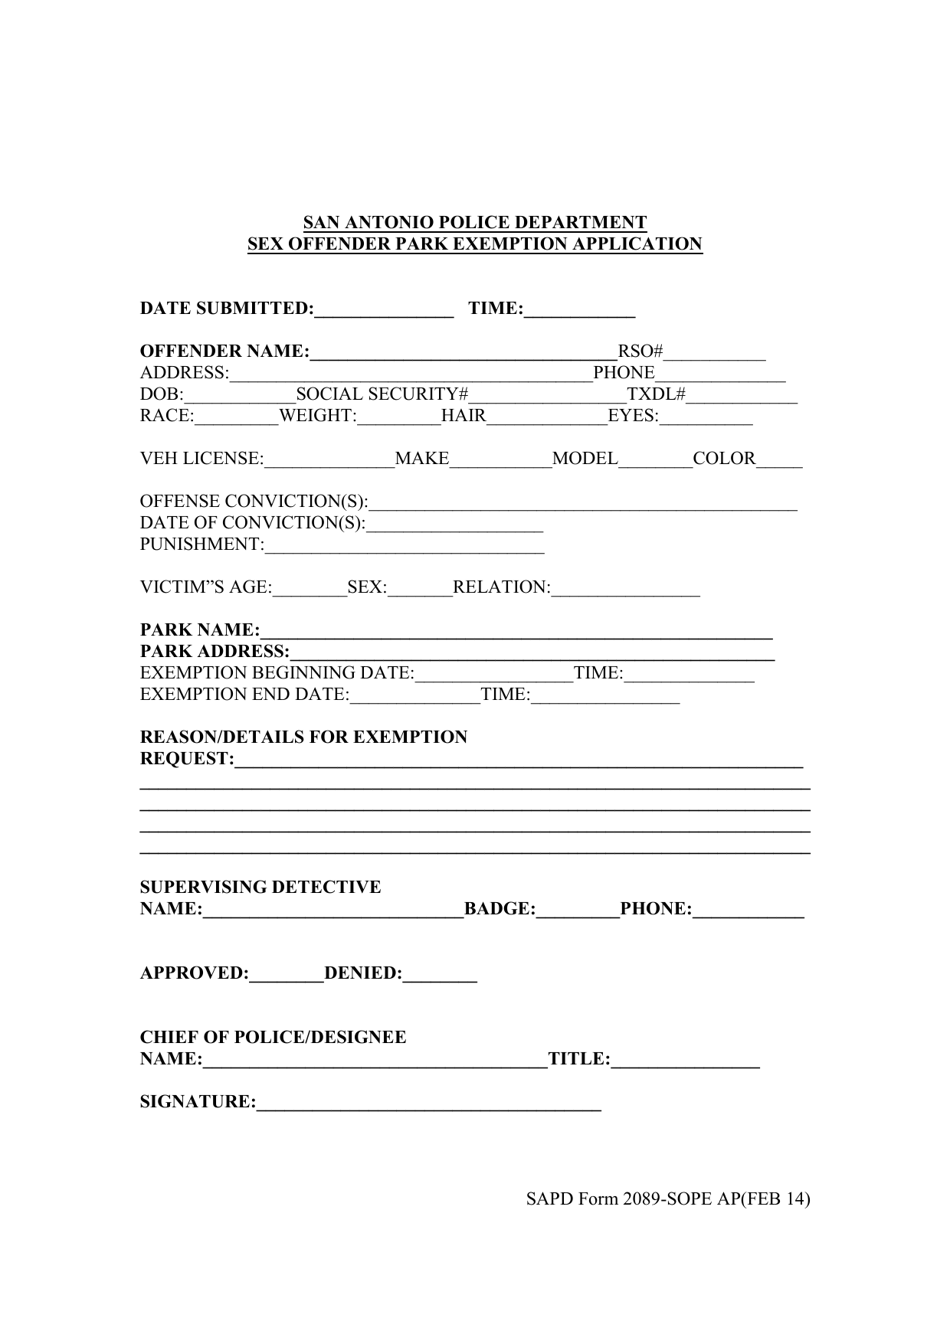 SAPD Form 2089-SOPE AP Sex Offender Park Exemption Application - County of San Antonio, Texas, Page 1